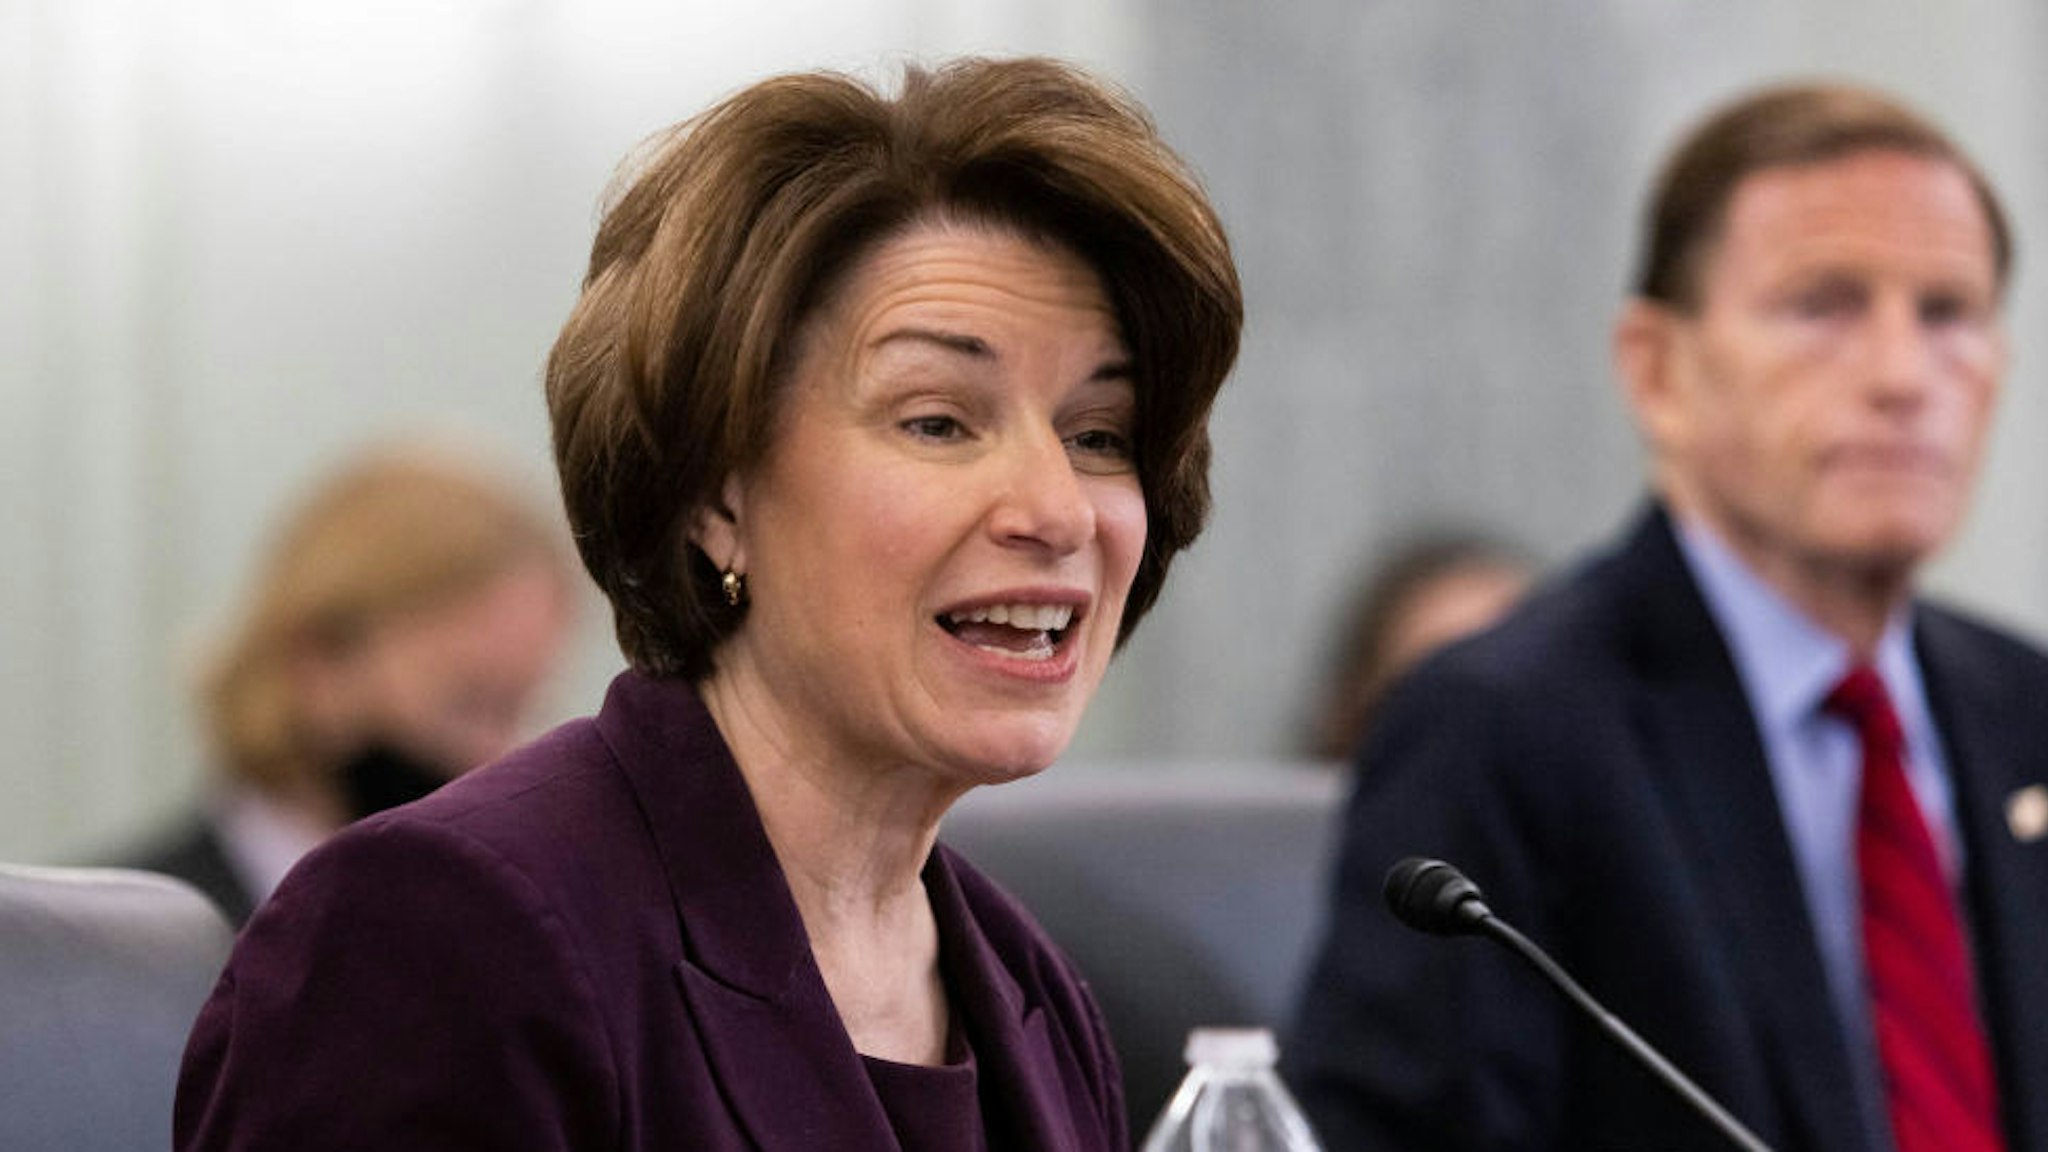 WASHINGTON, DC - APRIL 21: Senator Amy Klobuchar, D-MN, speaks during a Senate Commerce, Science, and Transportation Committee hearing on the nomination of Former Senator Bill Nelson, FL, to be NASA administrator, on Capitol Hill on April 21, 2021 in Washington, DC. Nelson was a senator representing Florida from 2001-2019.